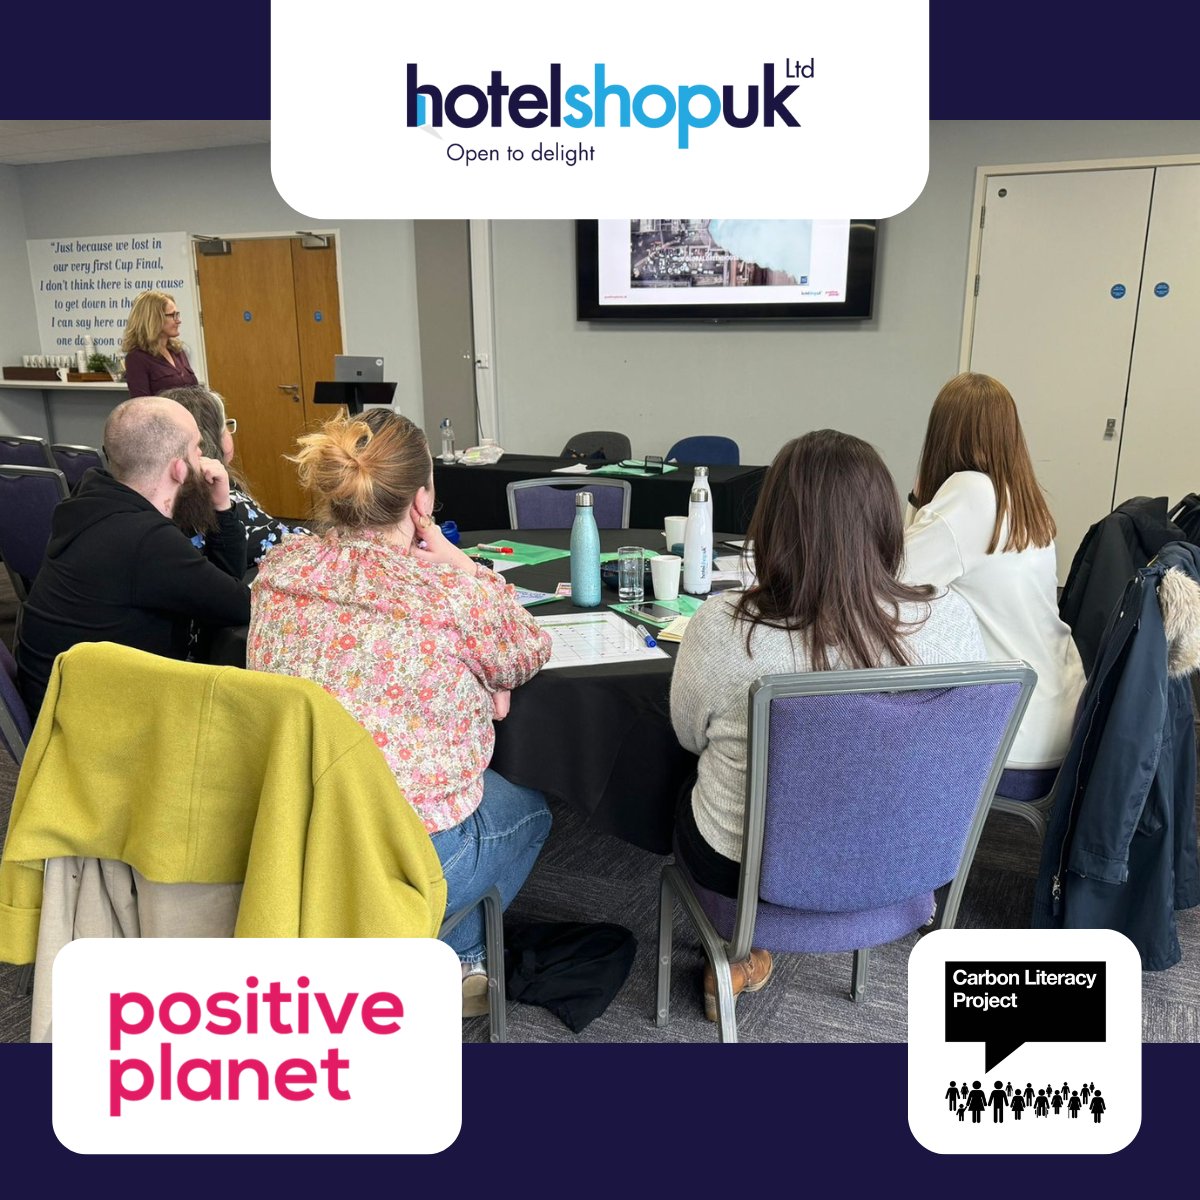 Our next cohort of staff enjoyed a great day in Cardiff with Positive Planet to become Carbon Literacy trained. 

Great to see that they took their HSUK bottles!  #HSUKTRAVELS to Cardiff City FC! 

#sustainability #travelandtourism